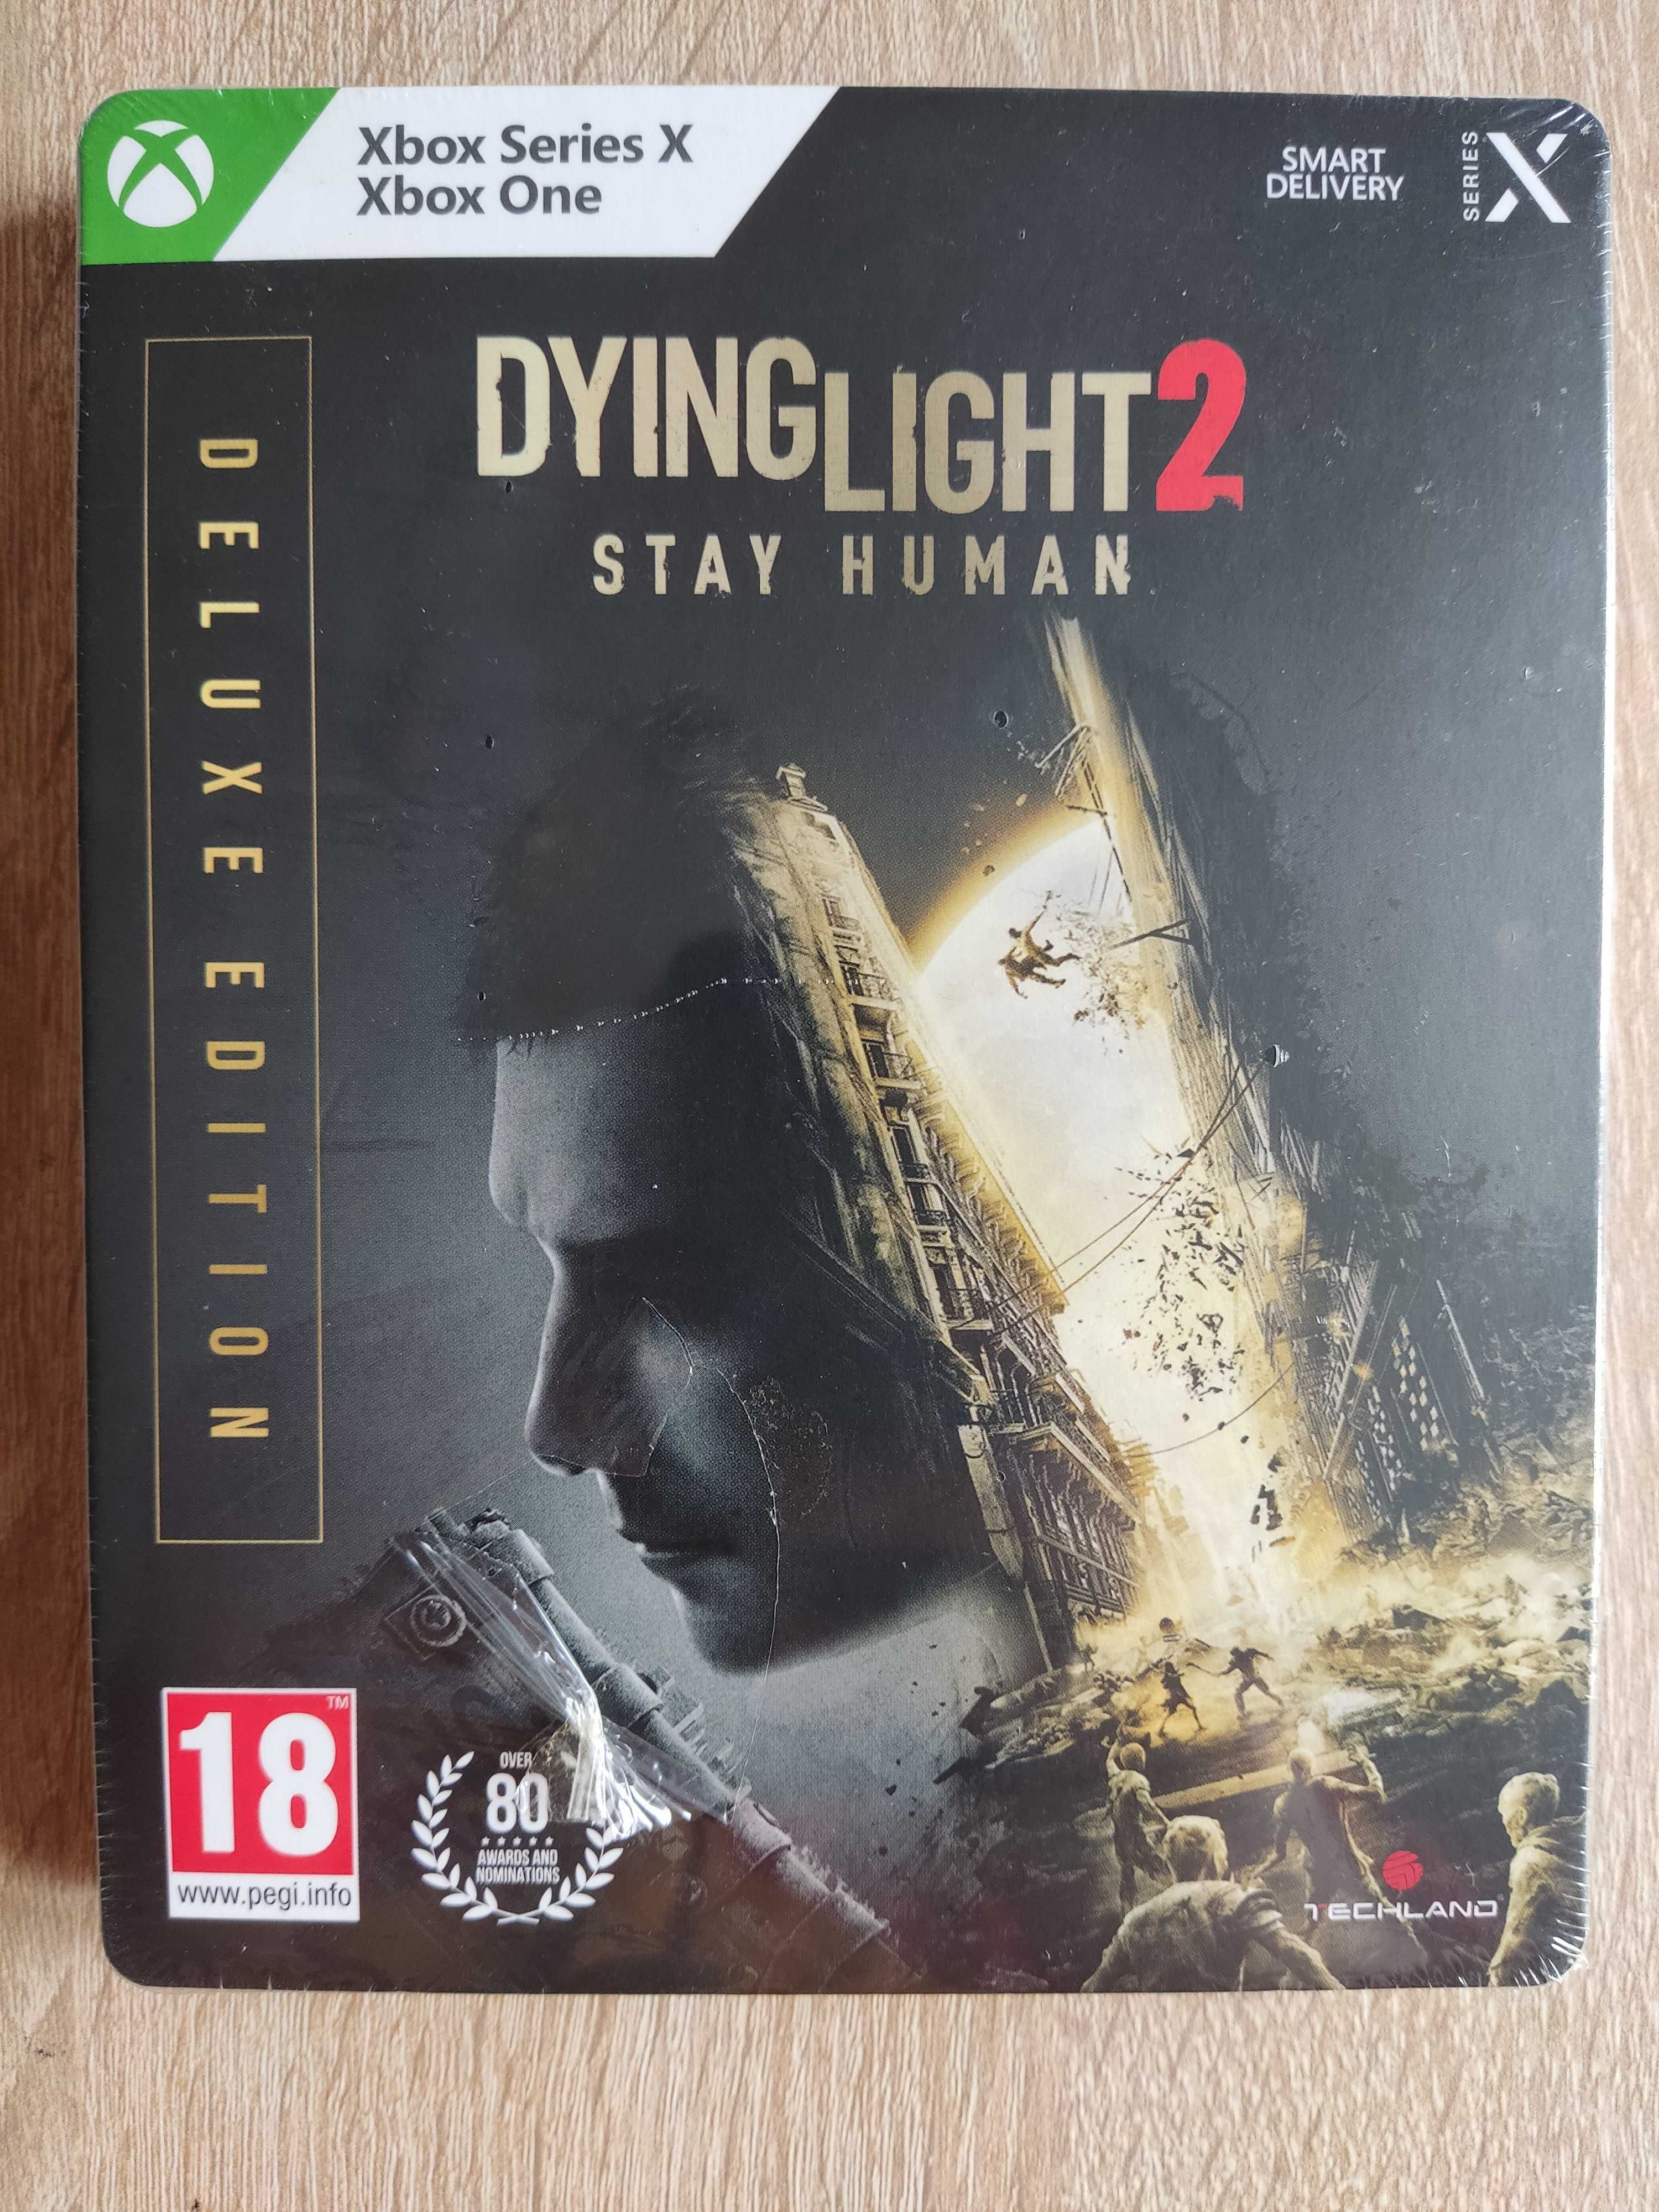 Dying Light 2 Stay Human Deluxe Edition Xone X:S